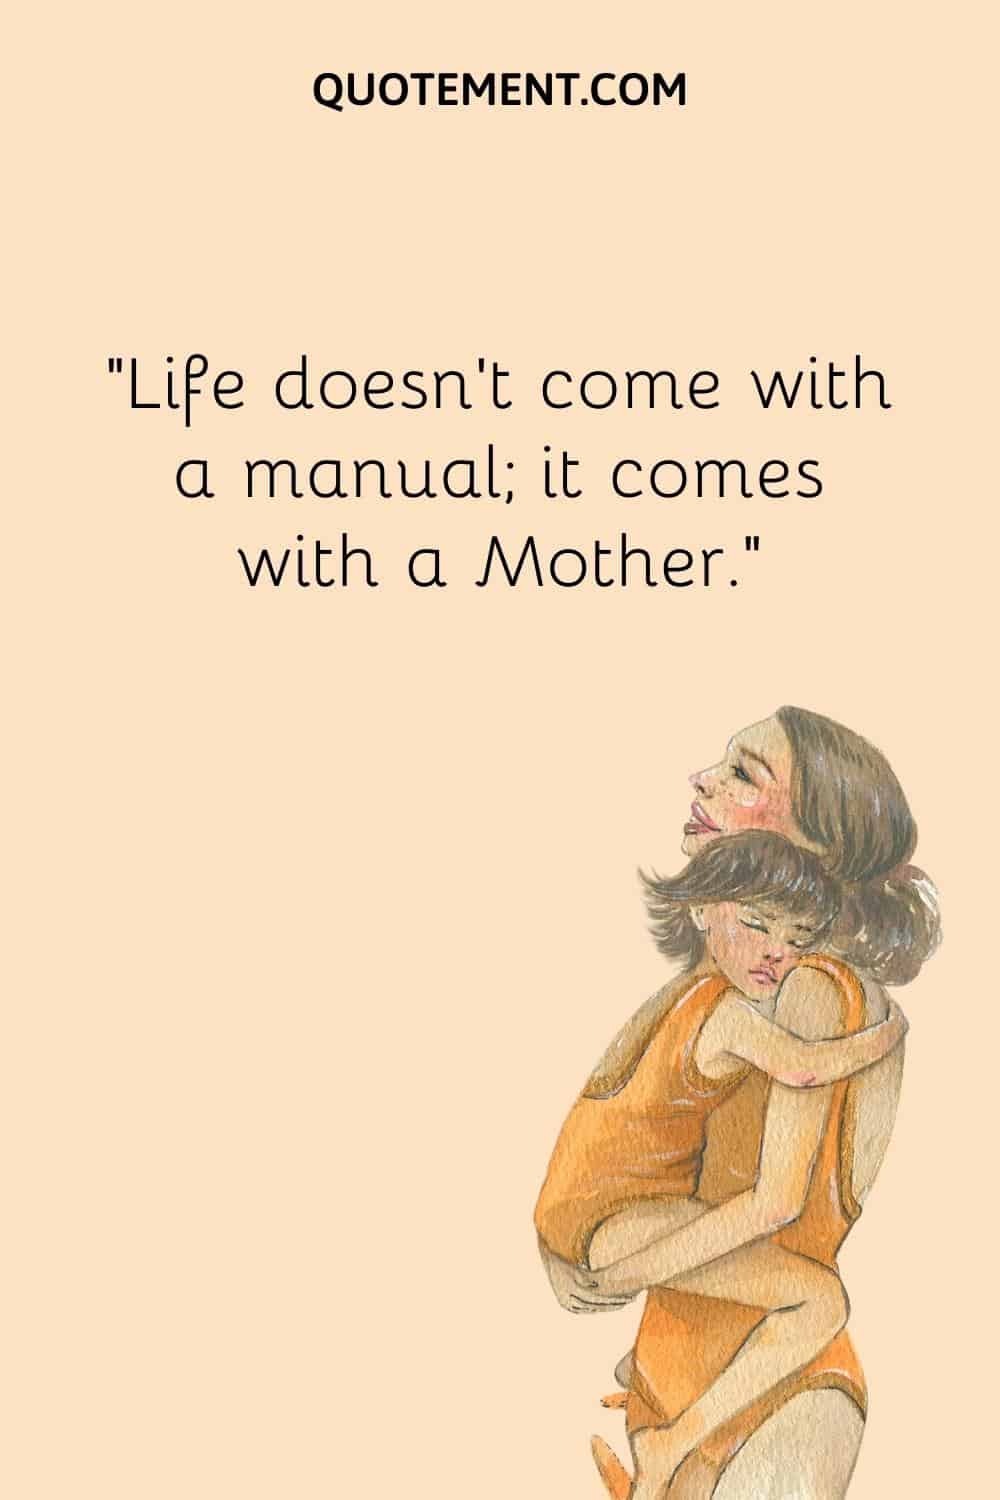 “Life doesn’t come with a manual; it comes with a Mother.”